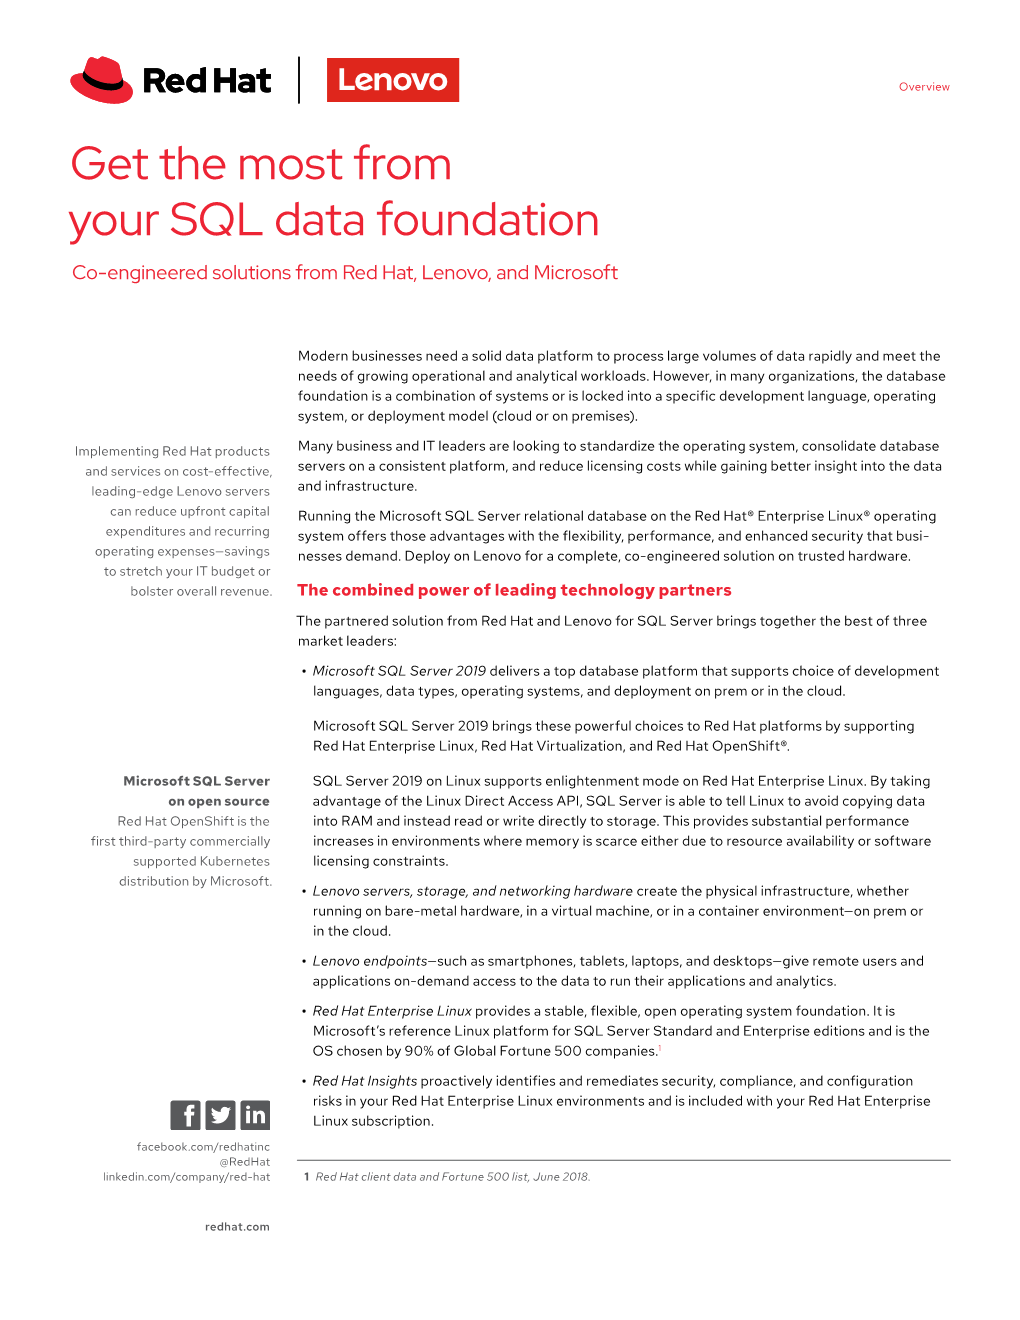 Get the Most from Your SQL Data Foundation Co-Engineered Solutions from Red Hat, Lenovo, and Microsoft